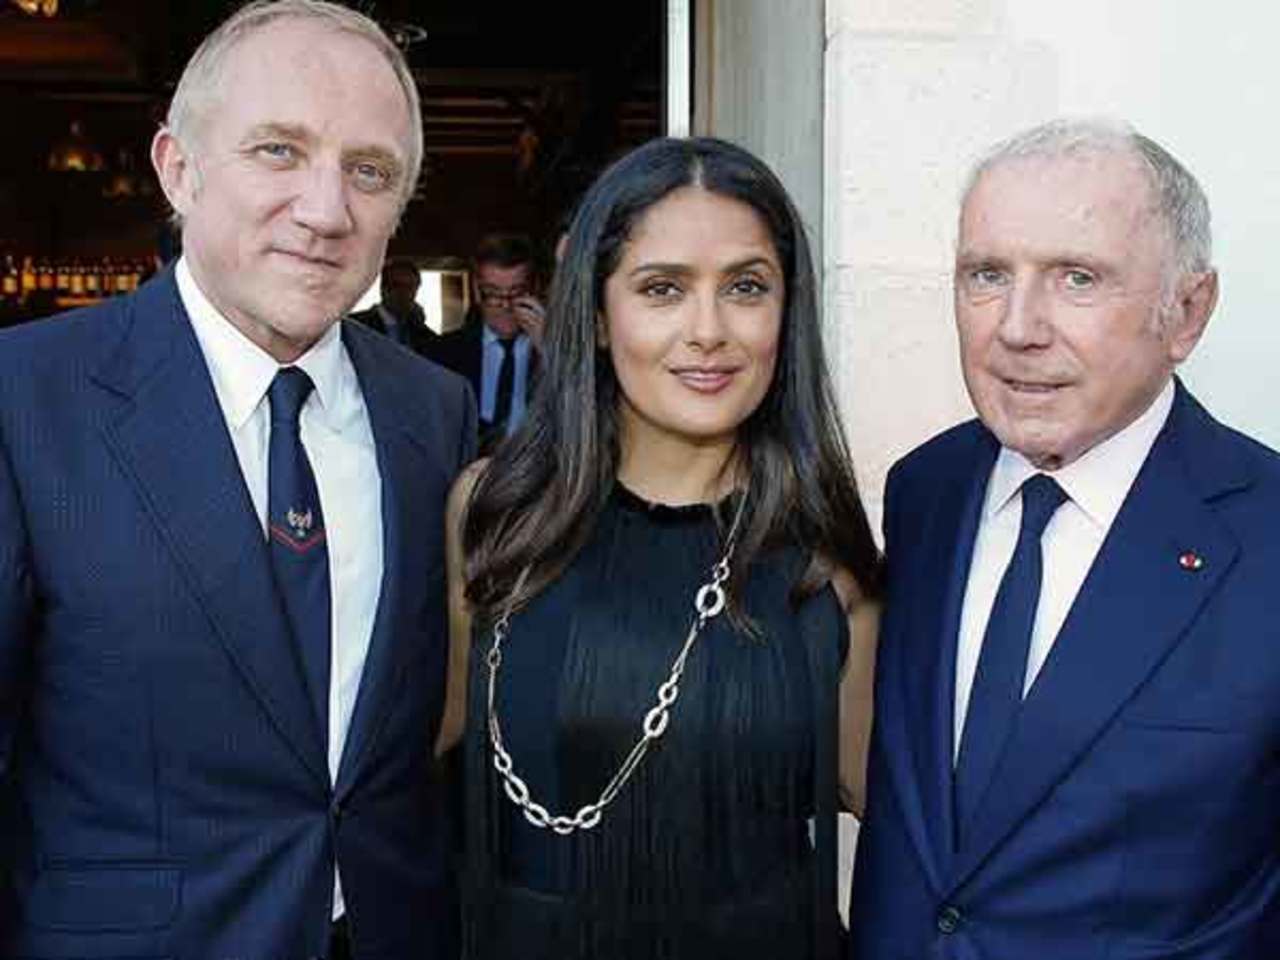 Salma Hayek Pinault mentions husband and father-in-law for their help over  Notre Dame